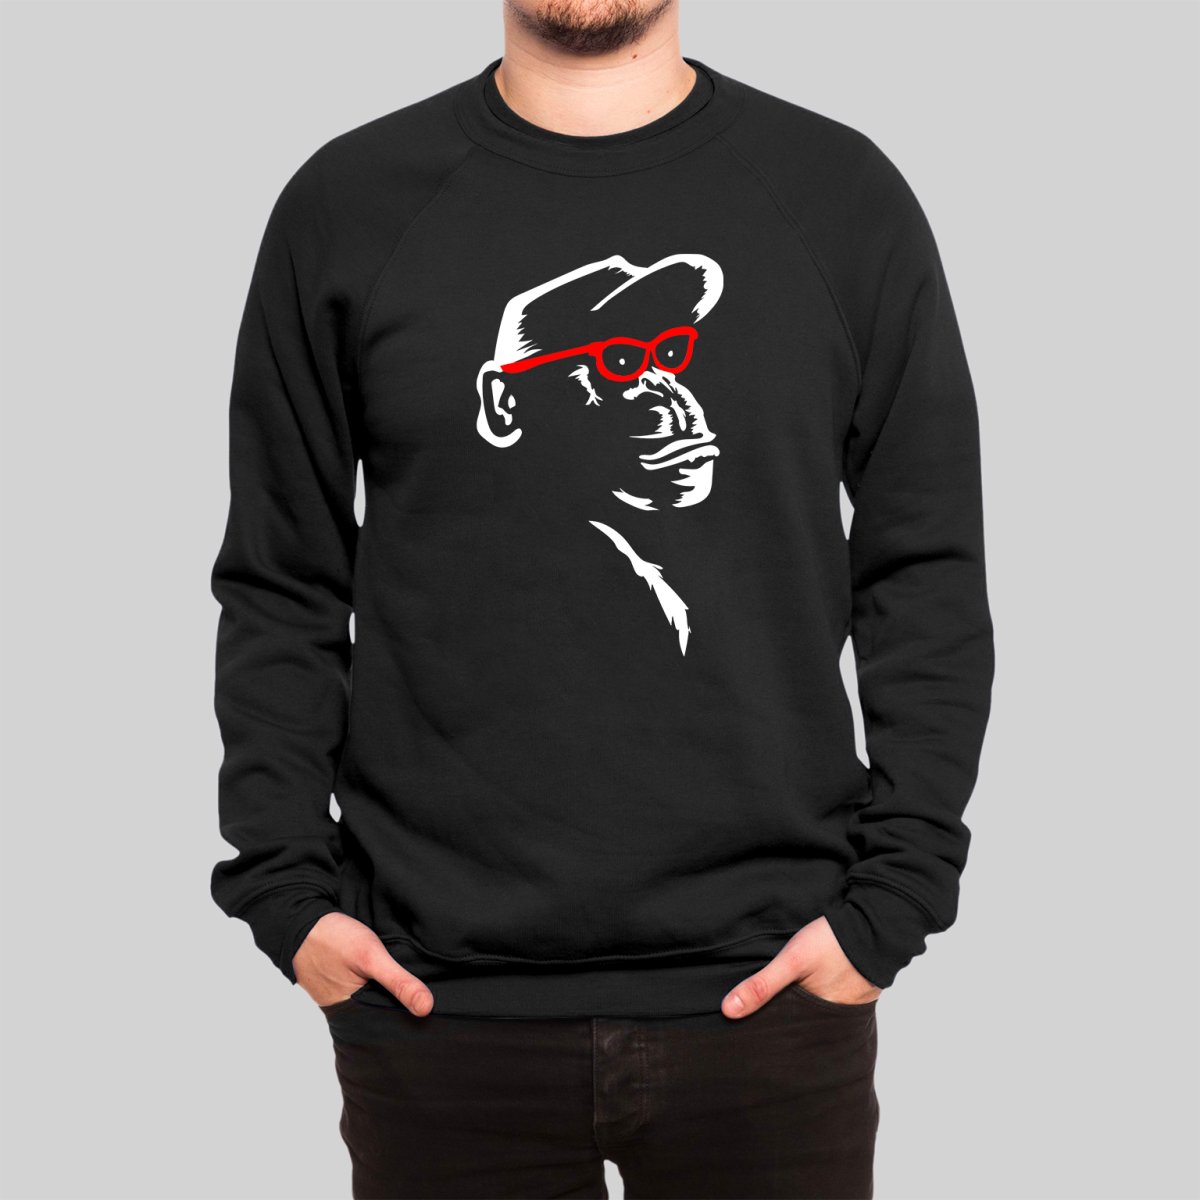 Monkey With Red Glasses Sweatshirt - Geeksoutfit